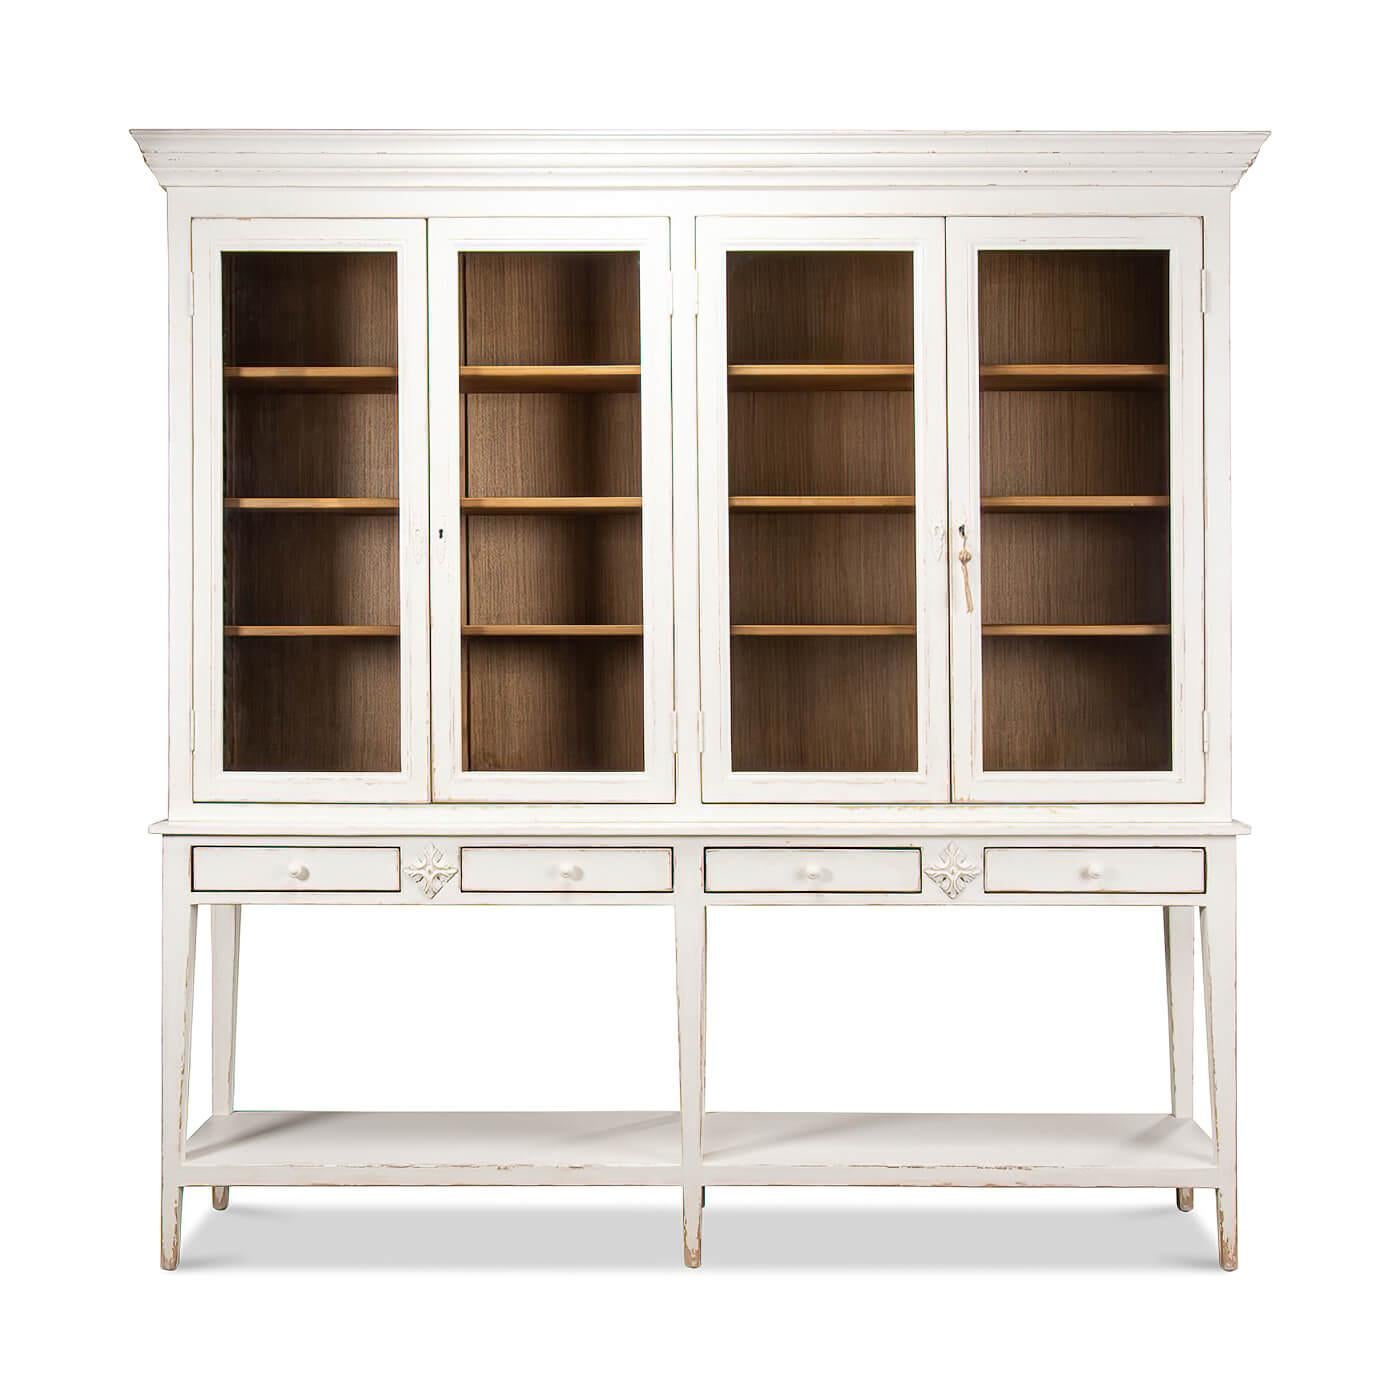 A French provincial-style pine painted display cabinet. The white display case has remarkably subtle details such as slightly splayed legs that are tapered and encase the bottom shelf. Crown molding, with glass front doors that expose a contrasting